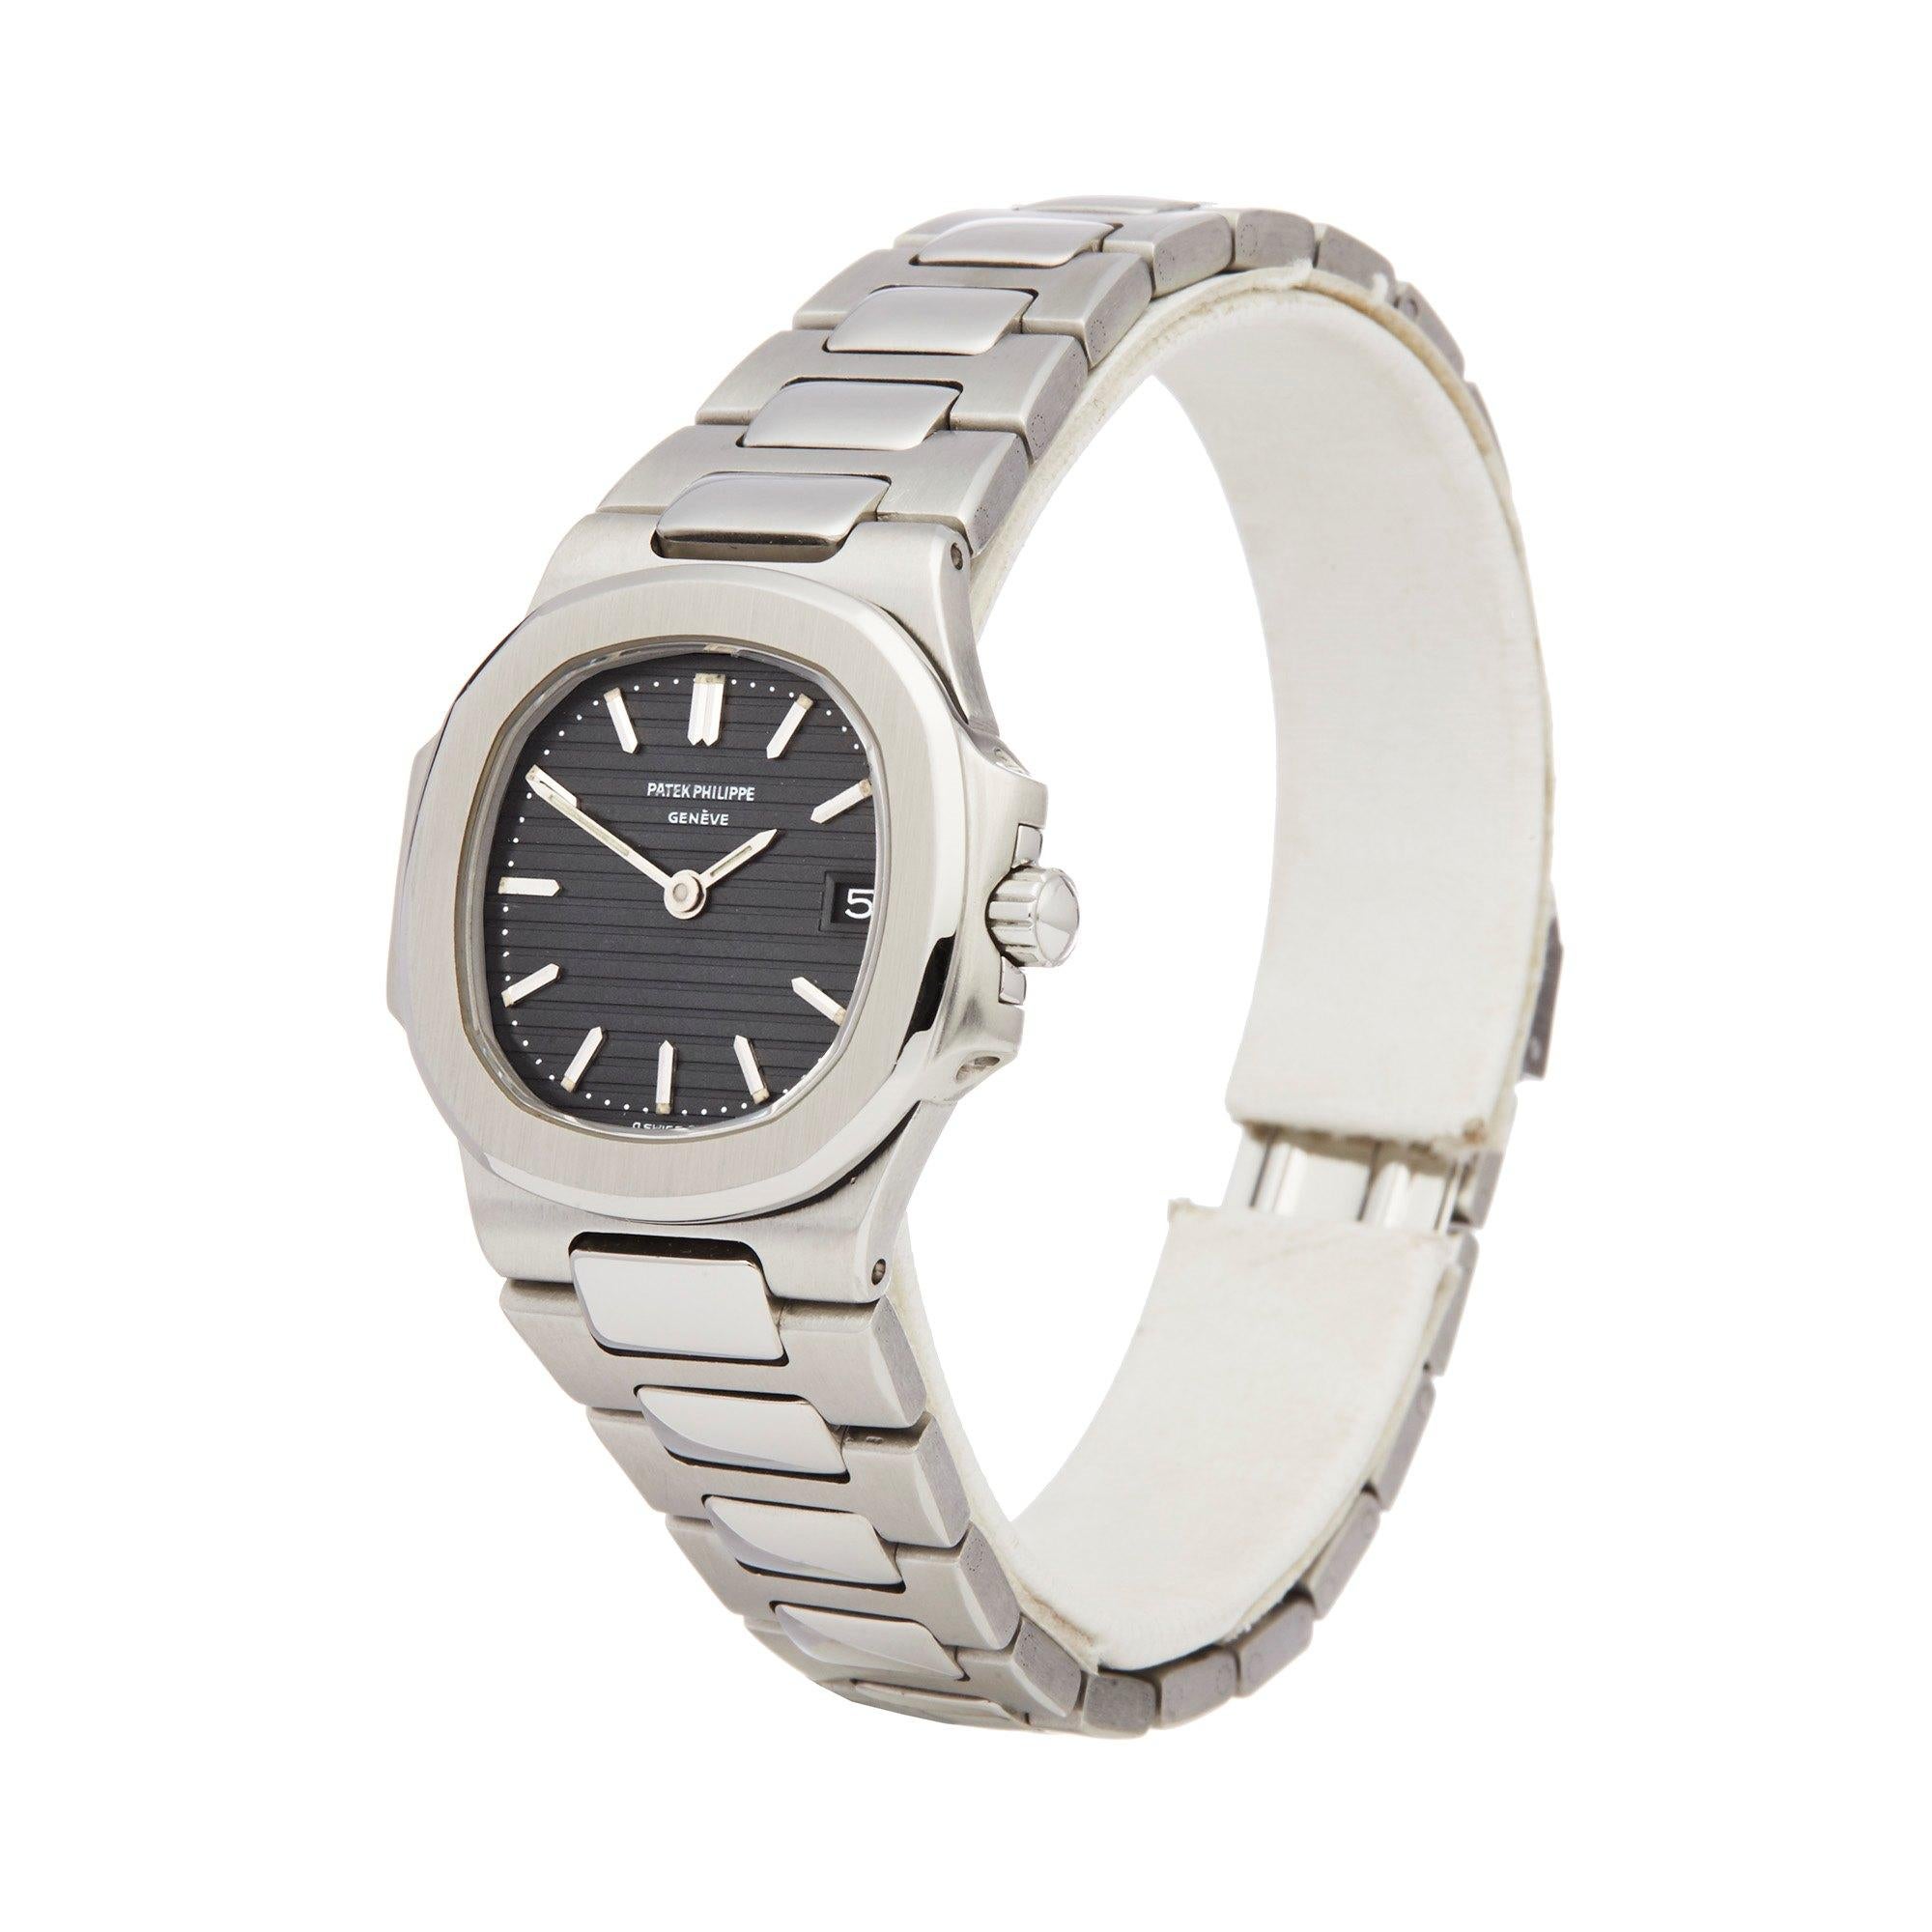 Xupes Reference: W007362
Manufacturer: Patek Philippe
Model: Nautilus
Model Variant: 
Model Number: 4700/1
Age: Circa 1980's
Gender: Ladies
Complete With: Xupes Presentation Box
Dial: Black Baton
Glass: Sapphire Crystal
Case Size: 27mm
Case